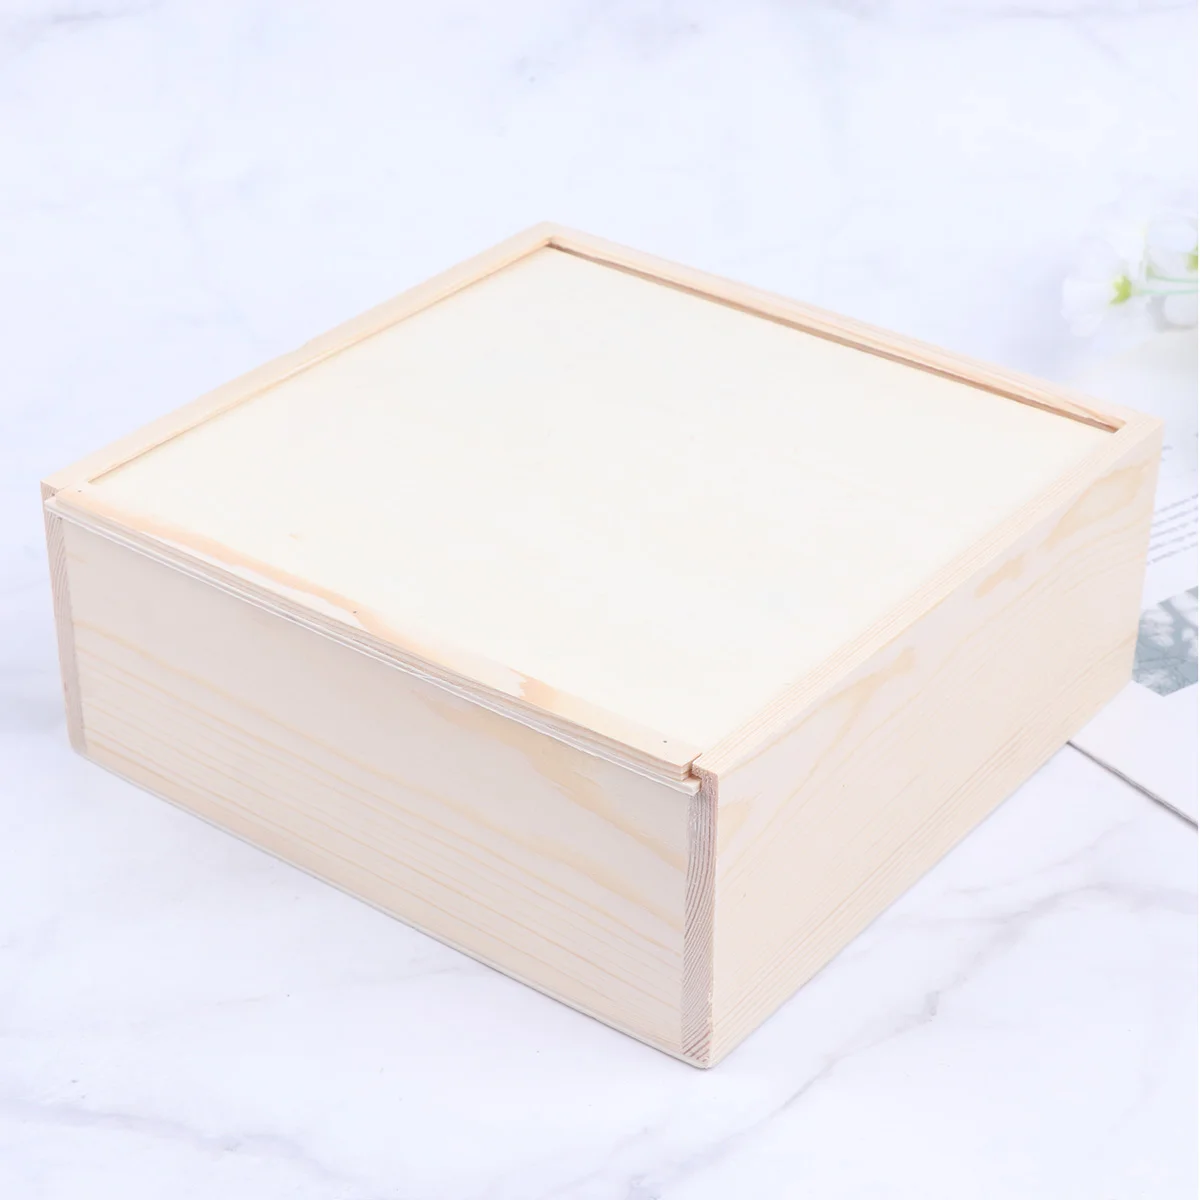 Operitacx Jewelry Organizer Tray Unfinished Pine Wood Box Wooden Gift Box with Push Cover for Hobbies and Home Storage Bracelet woodworking carving knife set wood carving tools pine wood handle carving knives craft knife carpenter s chisel complete blade